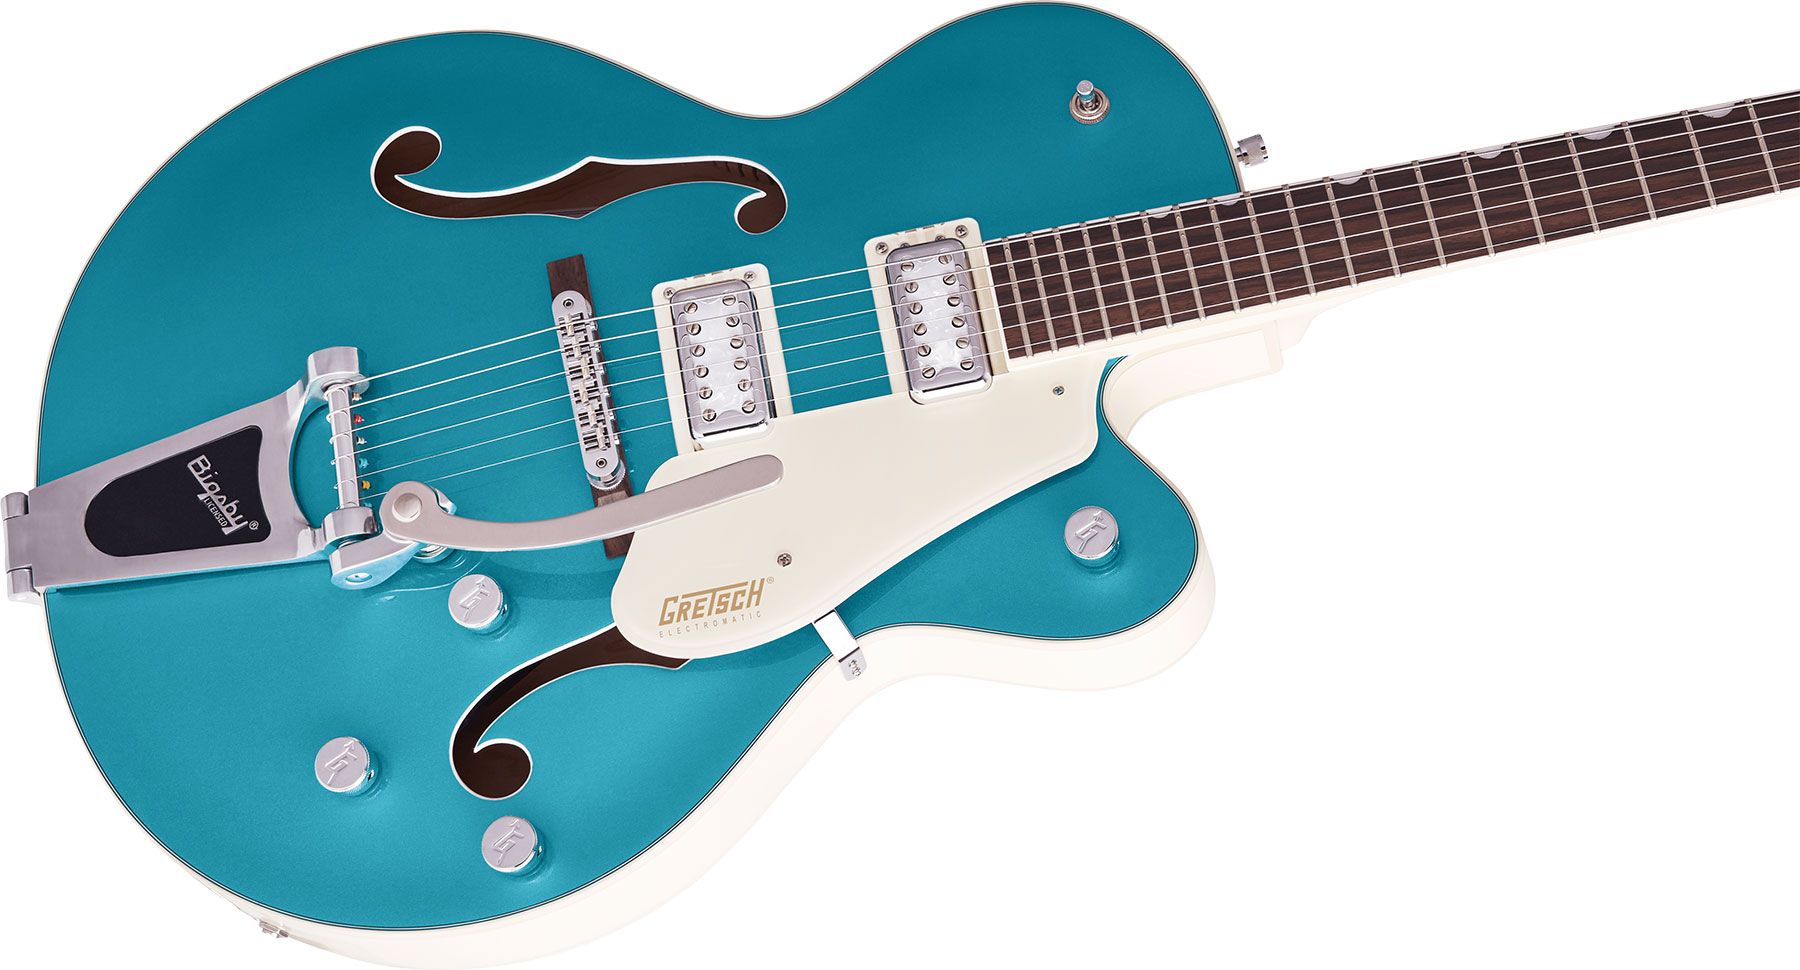 Gretsch G5410t Tri-five Electromatic Hollow Hh Bigsby Rw - Two-tone Ocean Turquoise/vintage White - Guitarra eléctrica semi caja - Variation 2